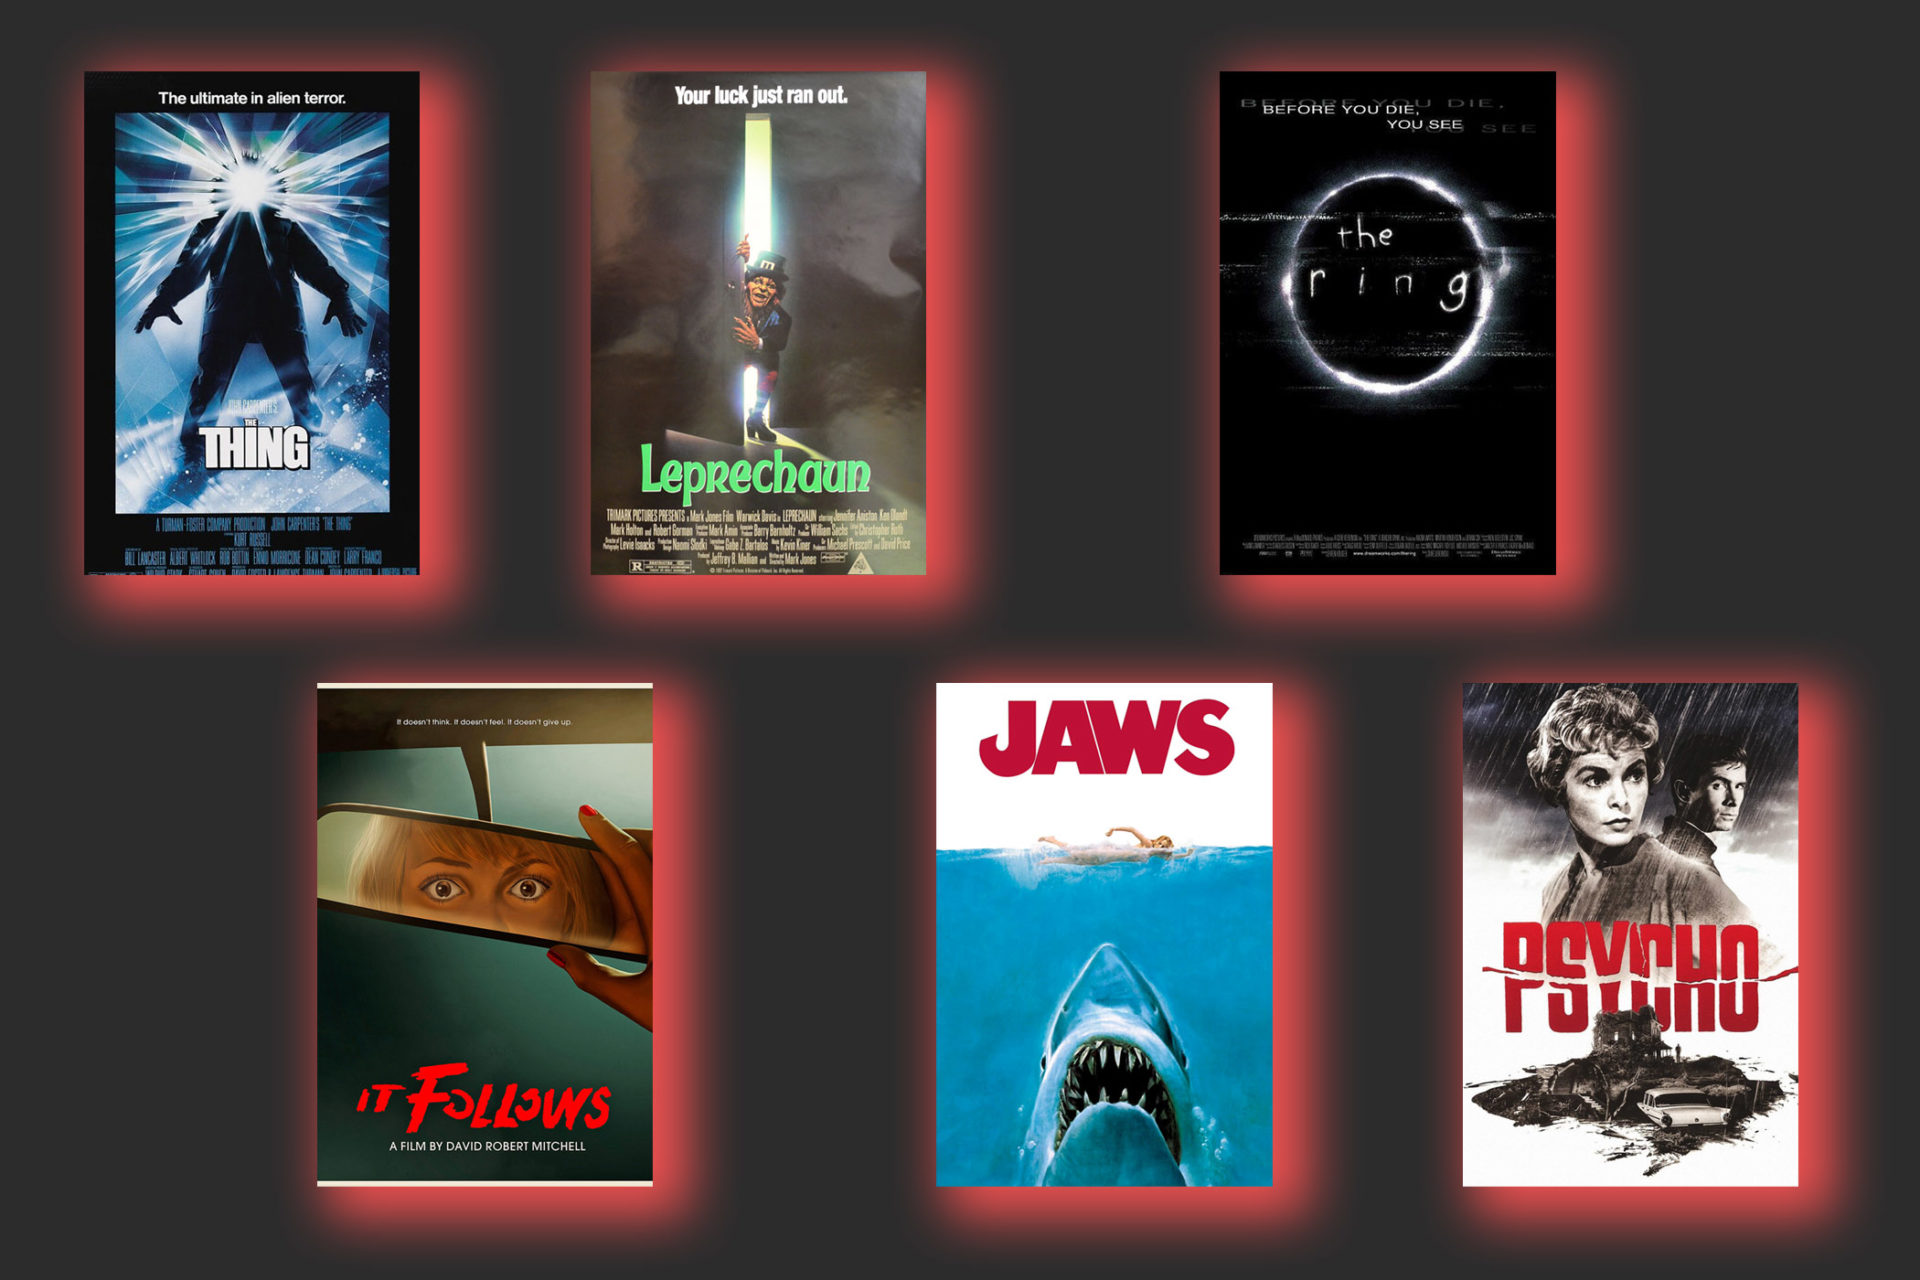 A Glossary of Horror Movie Sounds